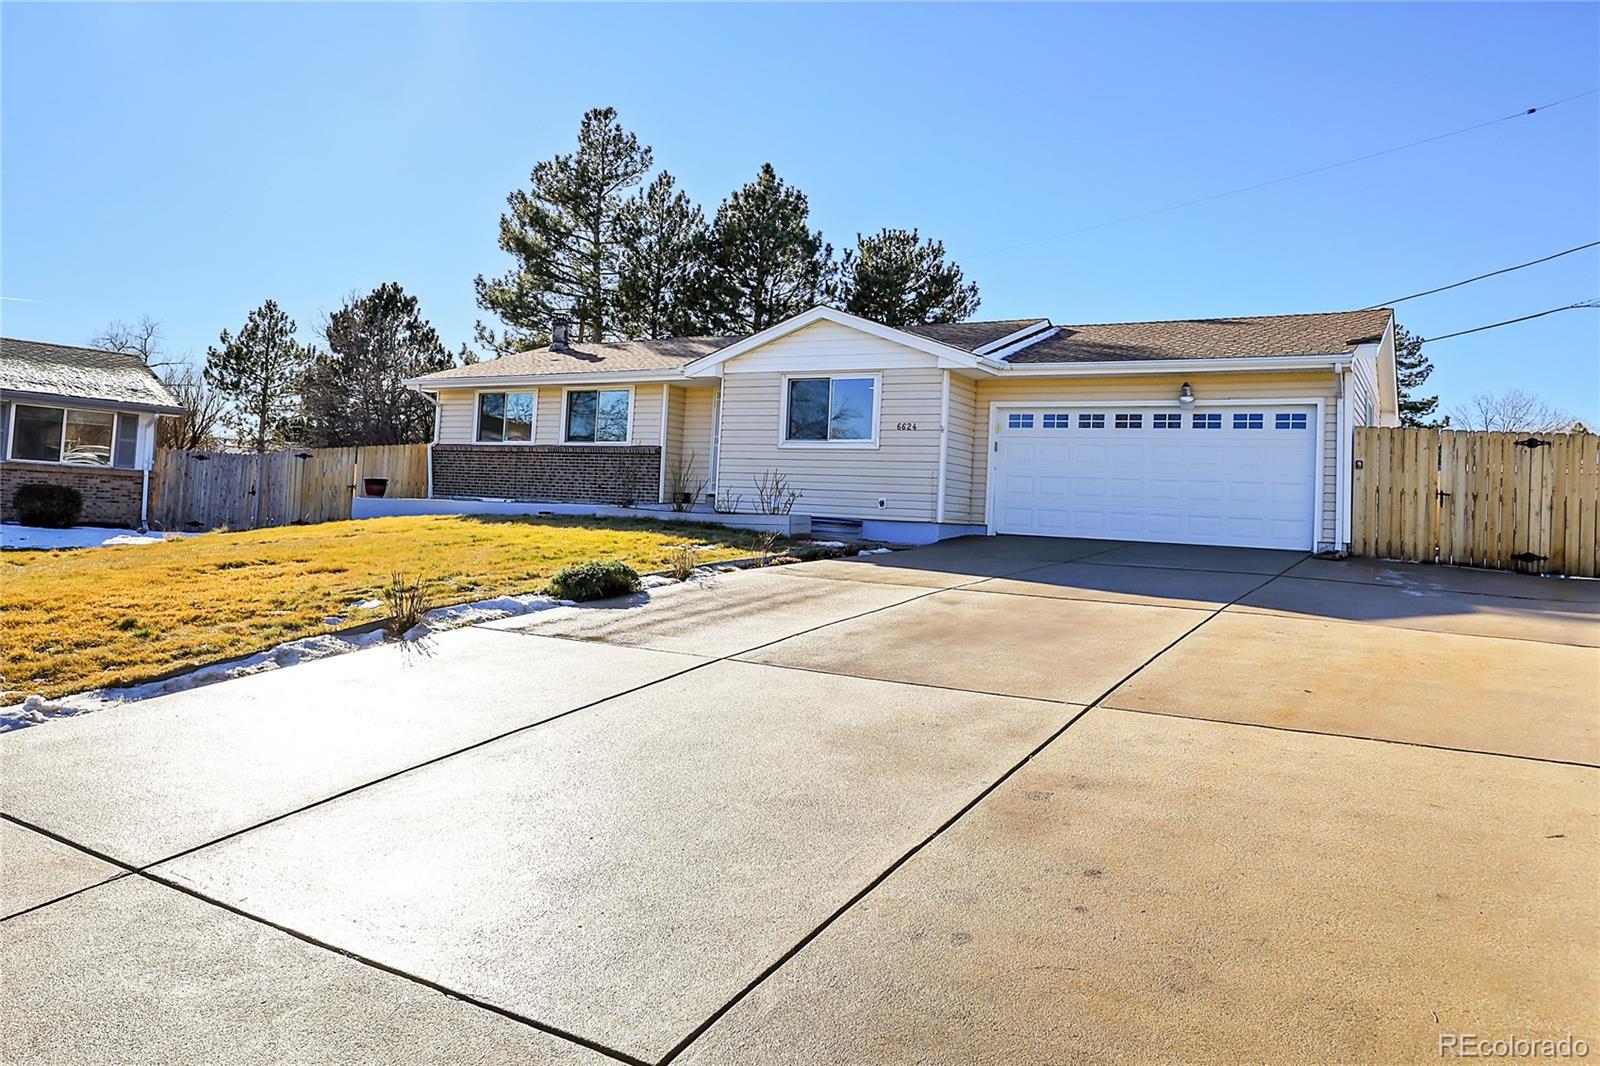 Report Image for 6624 W 69th Place,Arvada, Colorado